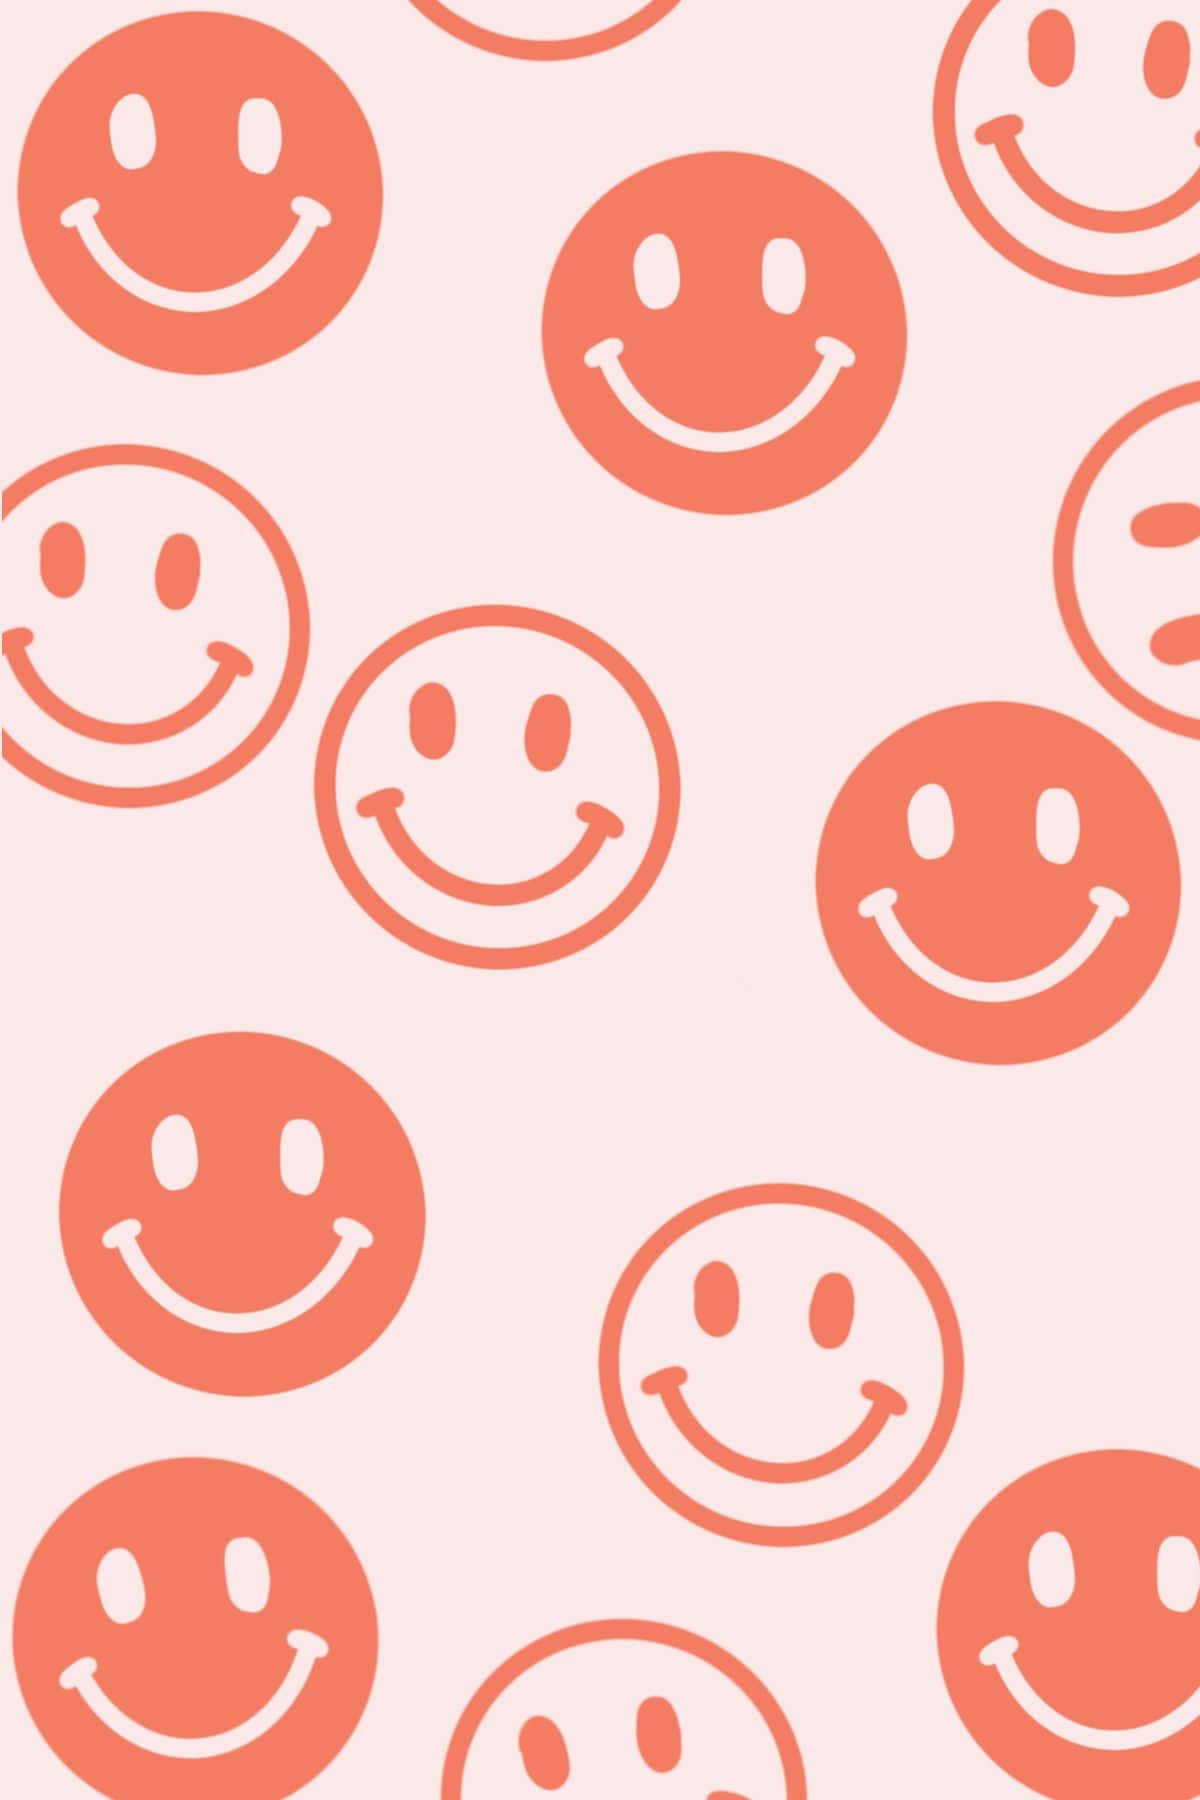 Cute Pink Happy Smile Face Background